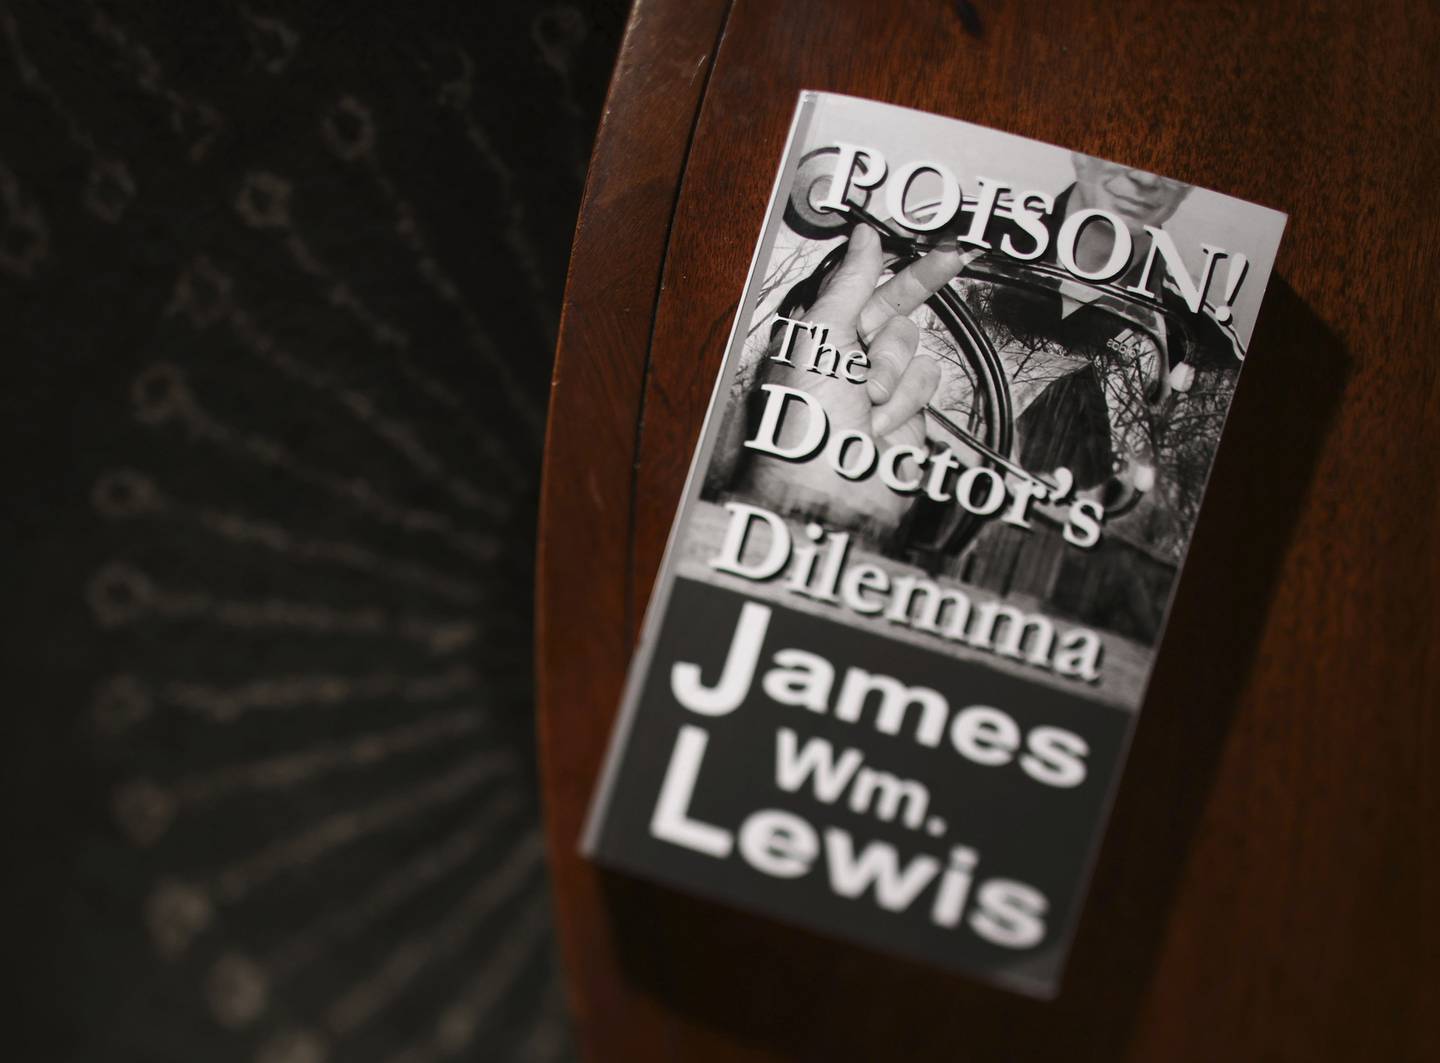 “Poison! The Doctor’s Dilemma” is a self-published 2010 novel by James Lewis about a brilliant doctor from rural Missouri who works with law enforcement.